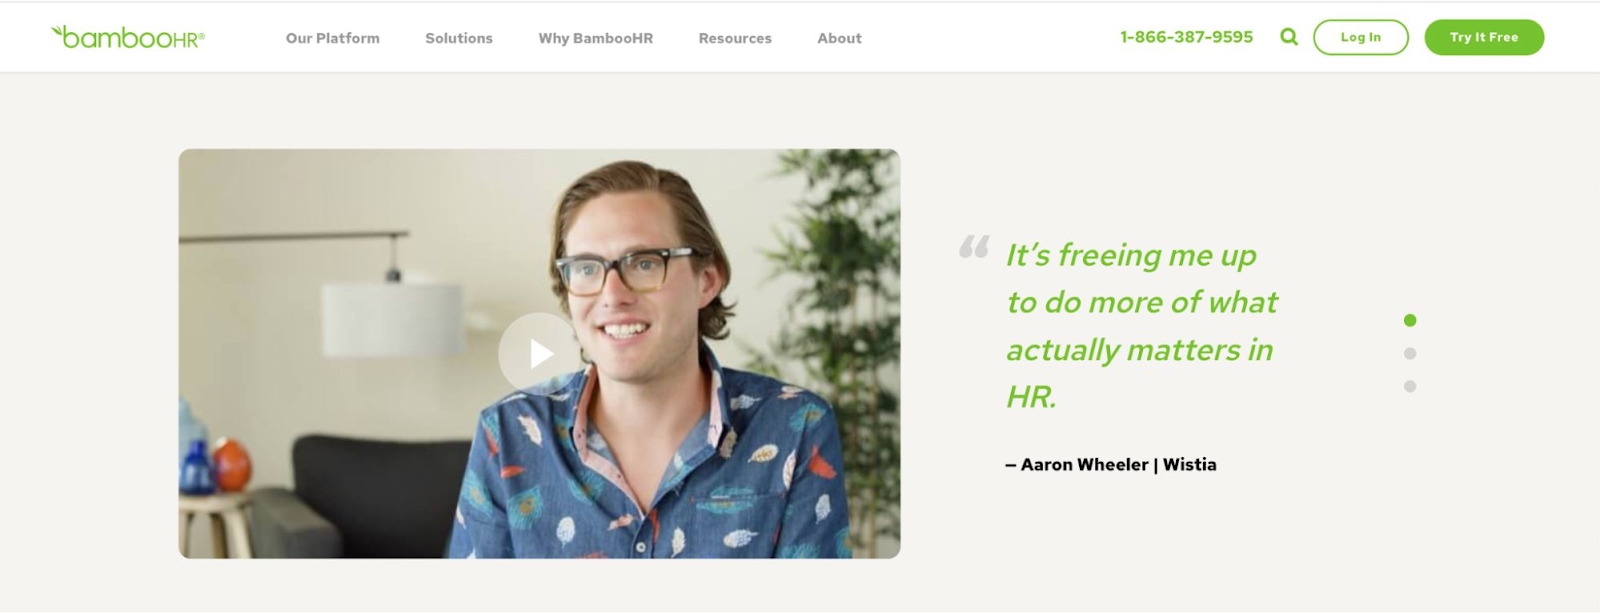 A testimonial on BambooHR’s site that reads "It's freeing me up to do more of what actually matters in HR"